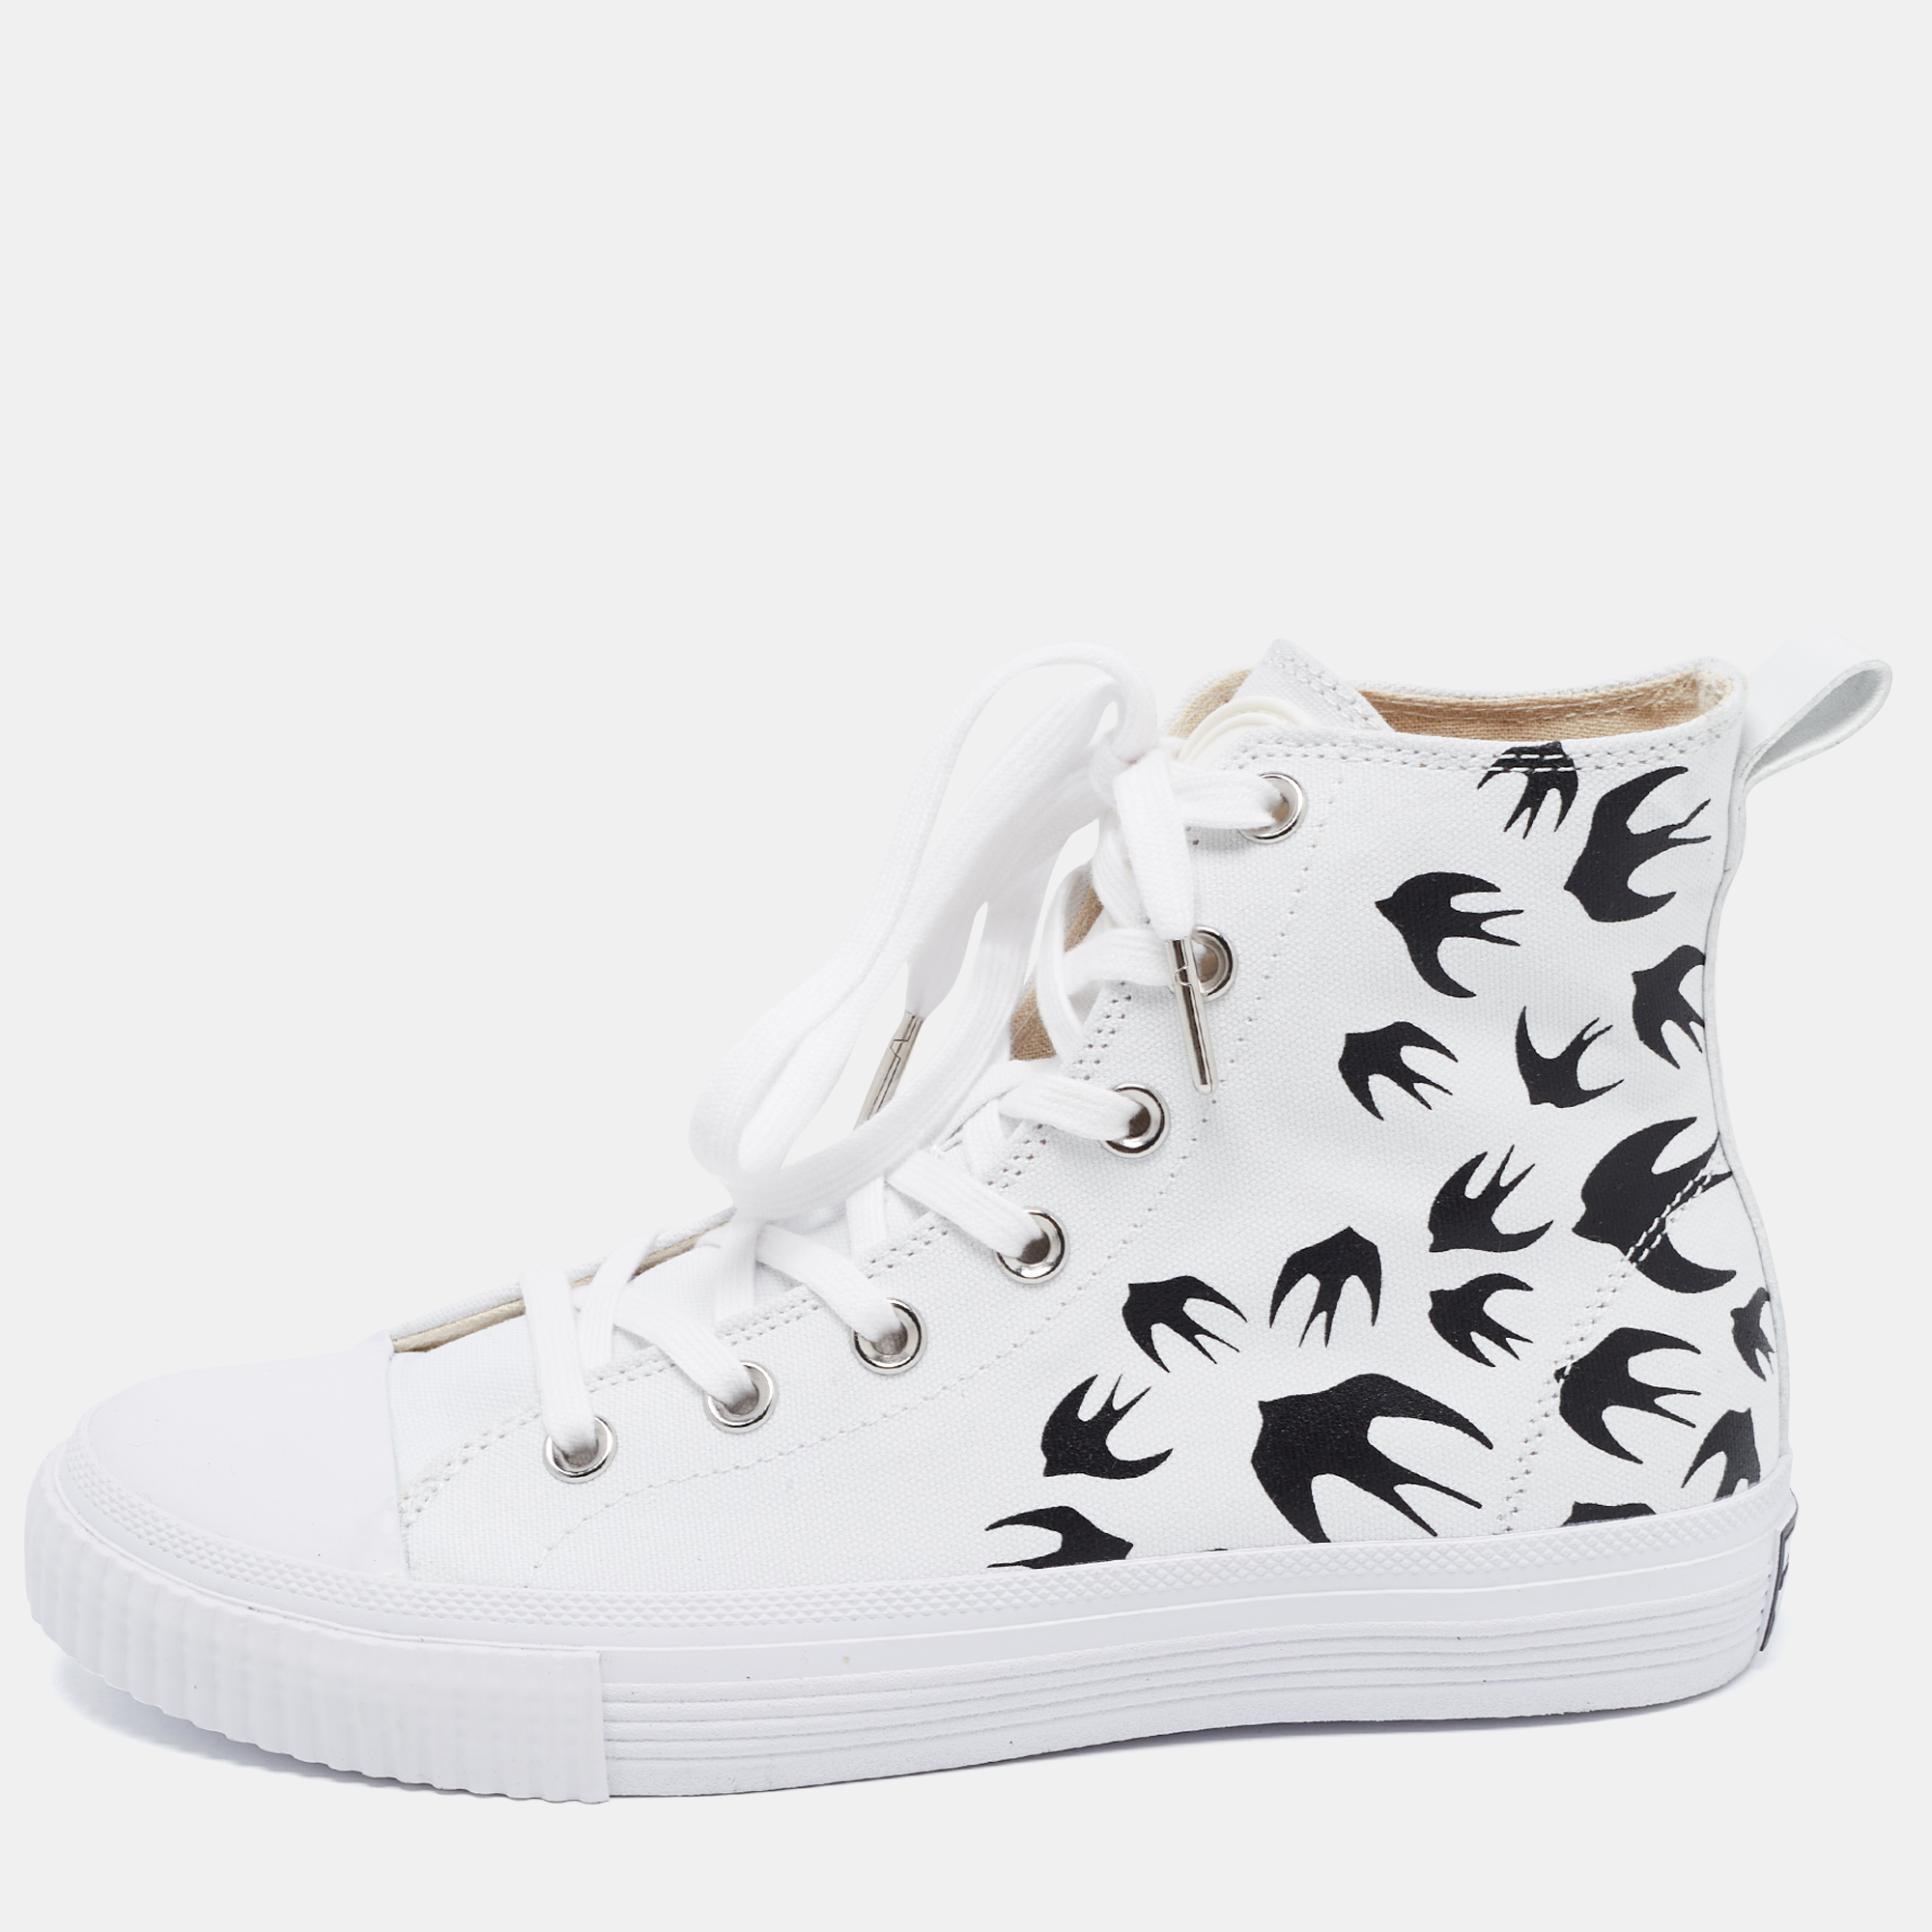 

MCQ White Canvas Swallow Plimsoll High Top Sneakers Size